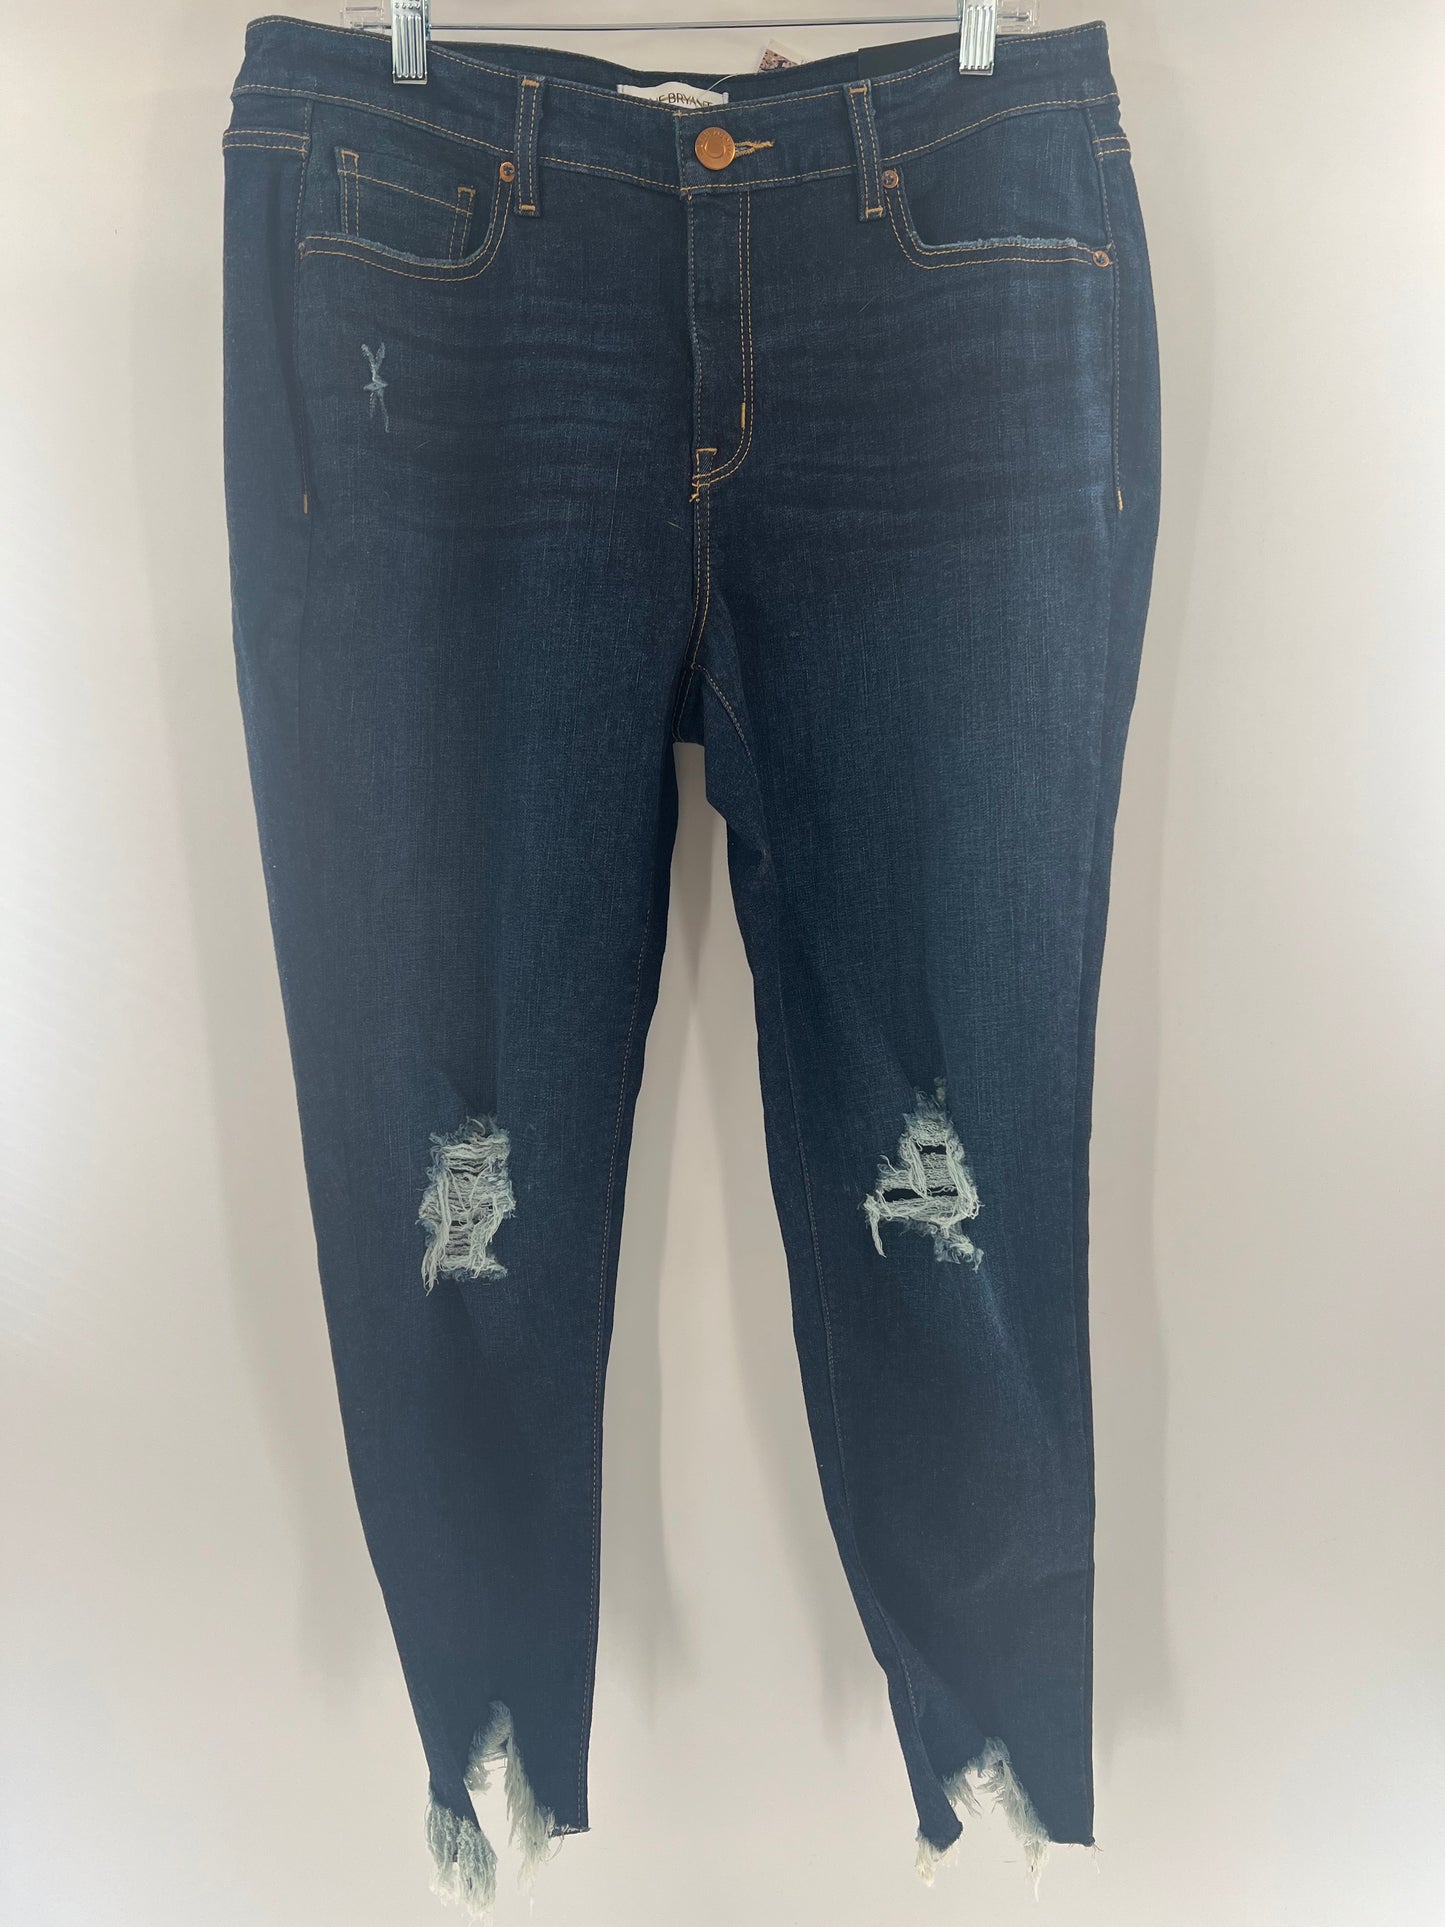 Lane Bryant Ripped Jeans Mid Rise Skinny Ankle Jeans (size 16 R)